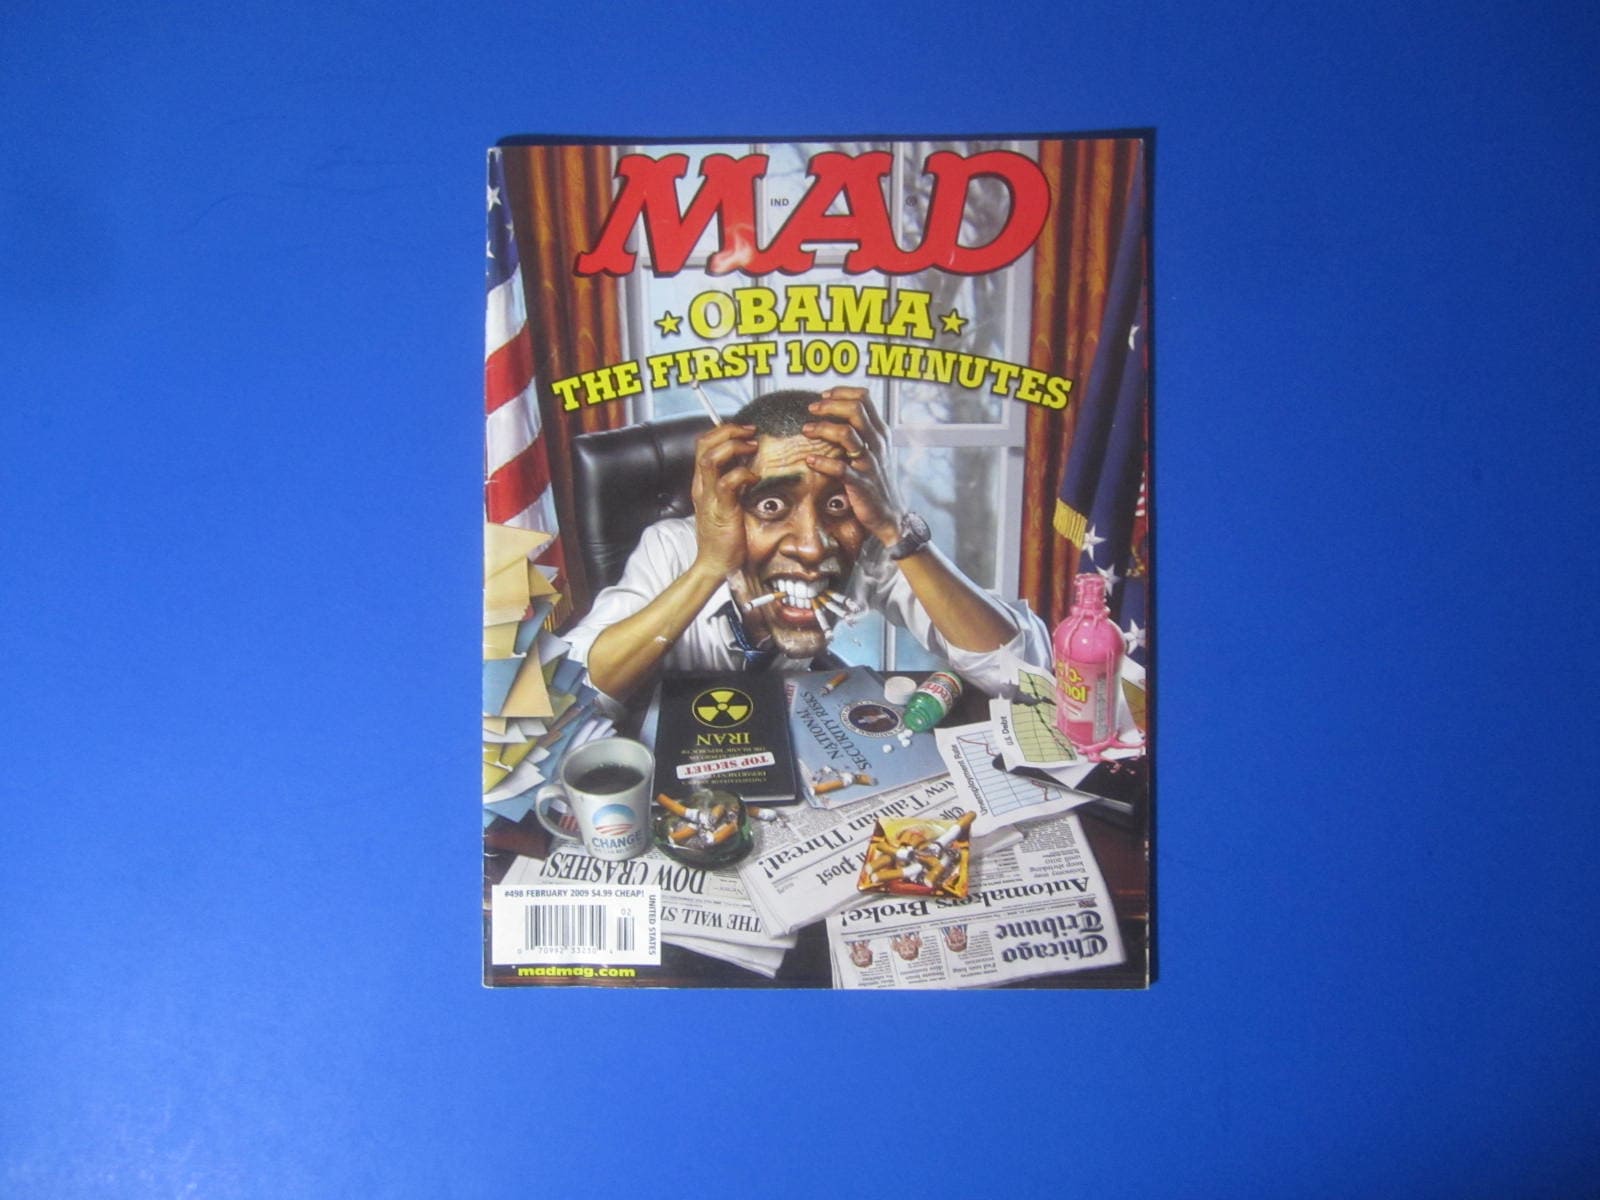 Mad magazine - Obama The First 100 Minutes - February 2009